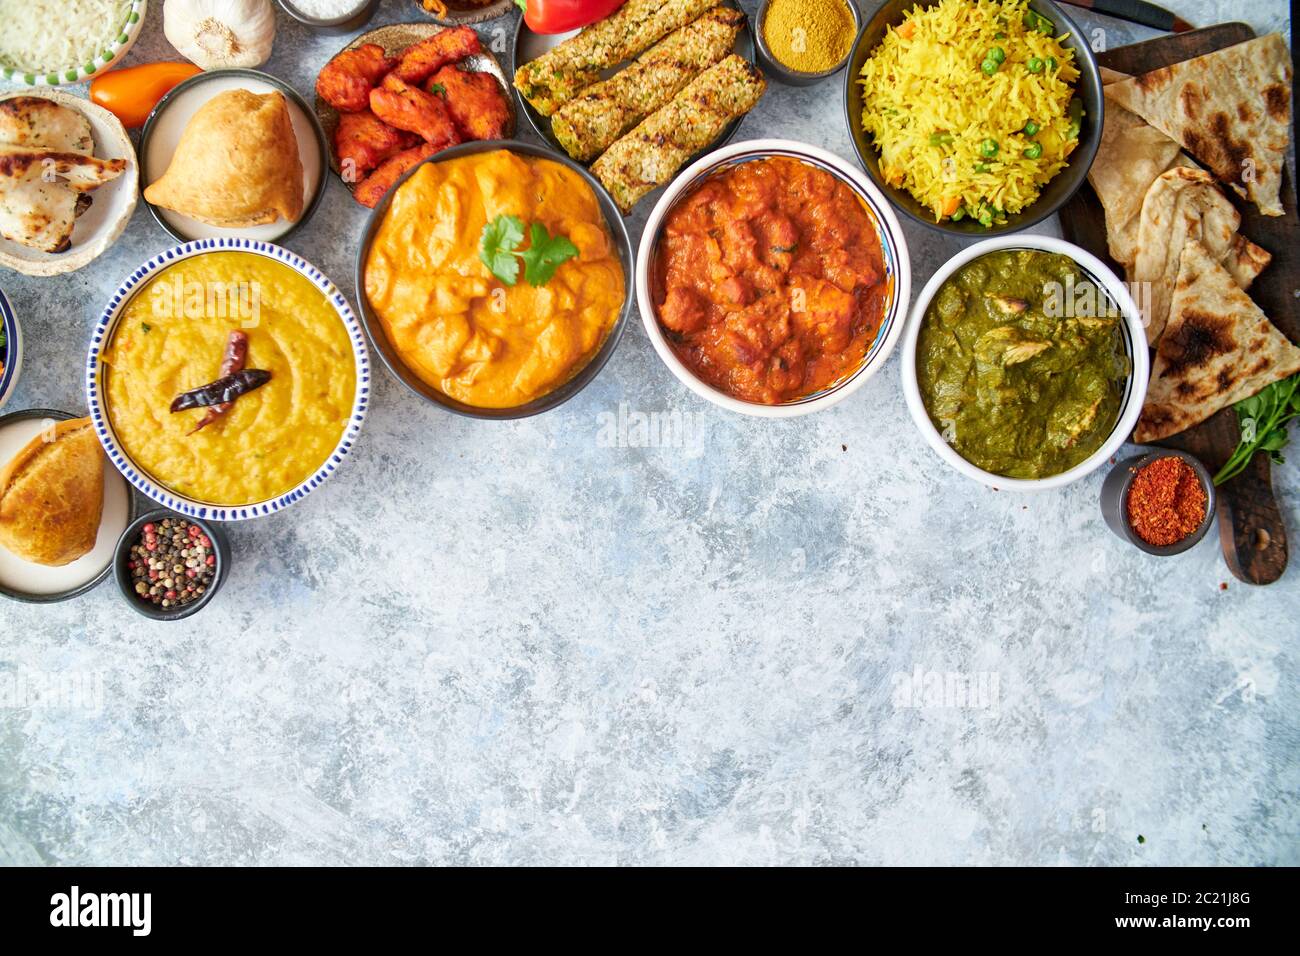 Composition of Indian cuisine in ceramic bowls on stone table Stock Photo